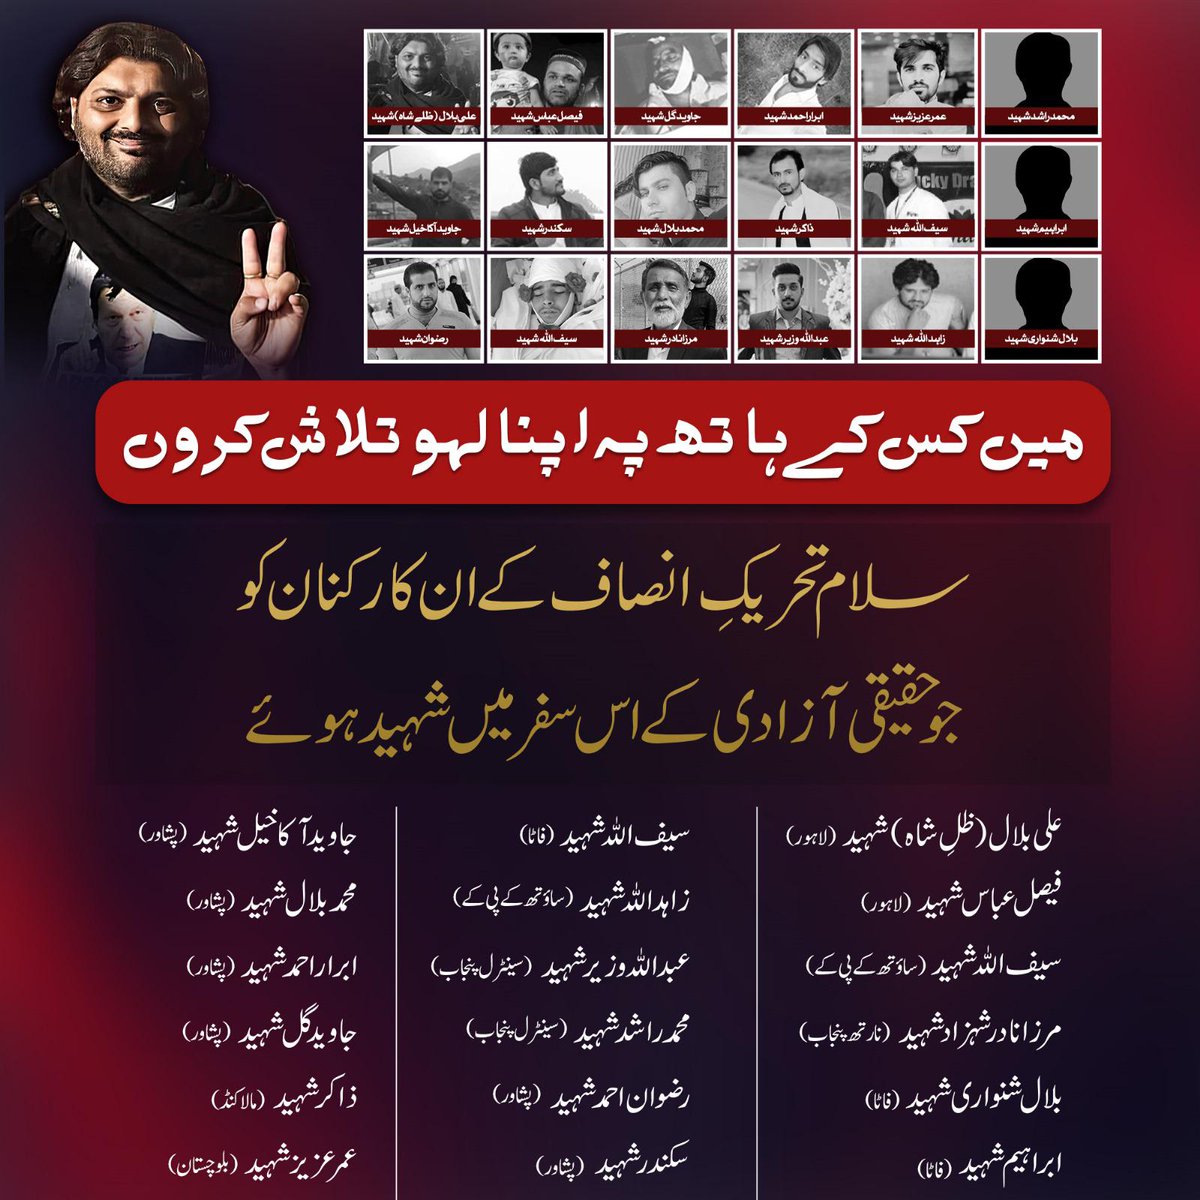 Never forget the martyrs of the movement for Haqeeqi Azadi - genuine democracy, freedom, and the rule of law - whose lives were brutally taken by a fascist regime. 

Will anyone apologize for their murder?

#معافی_آپ_مانگیں